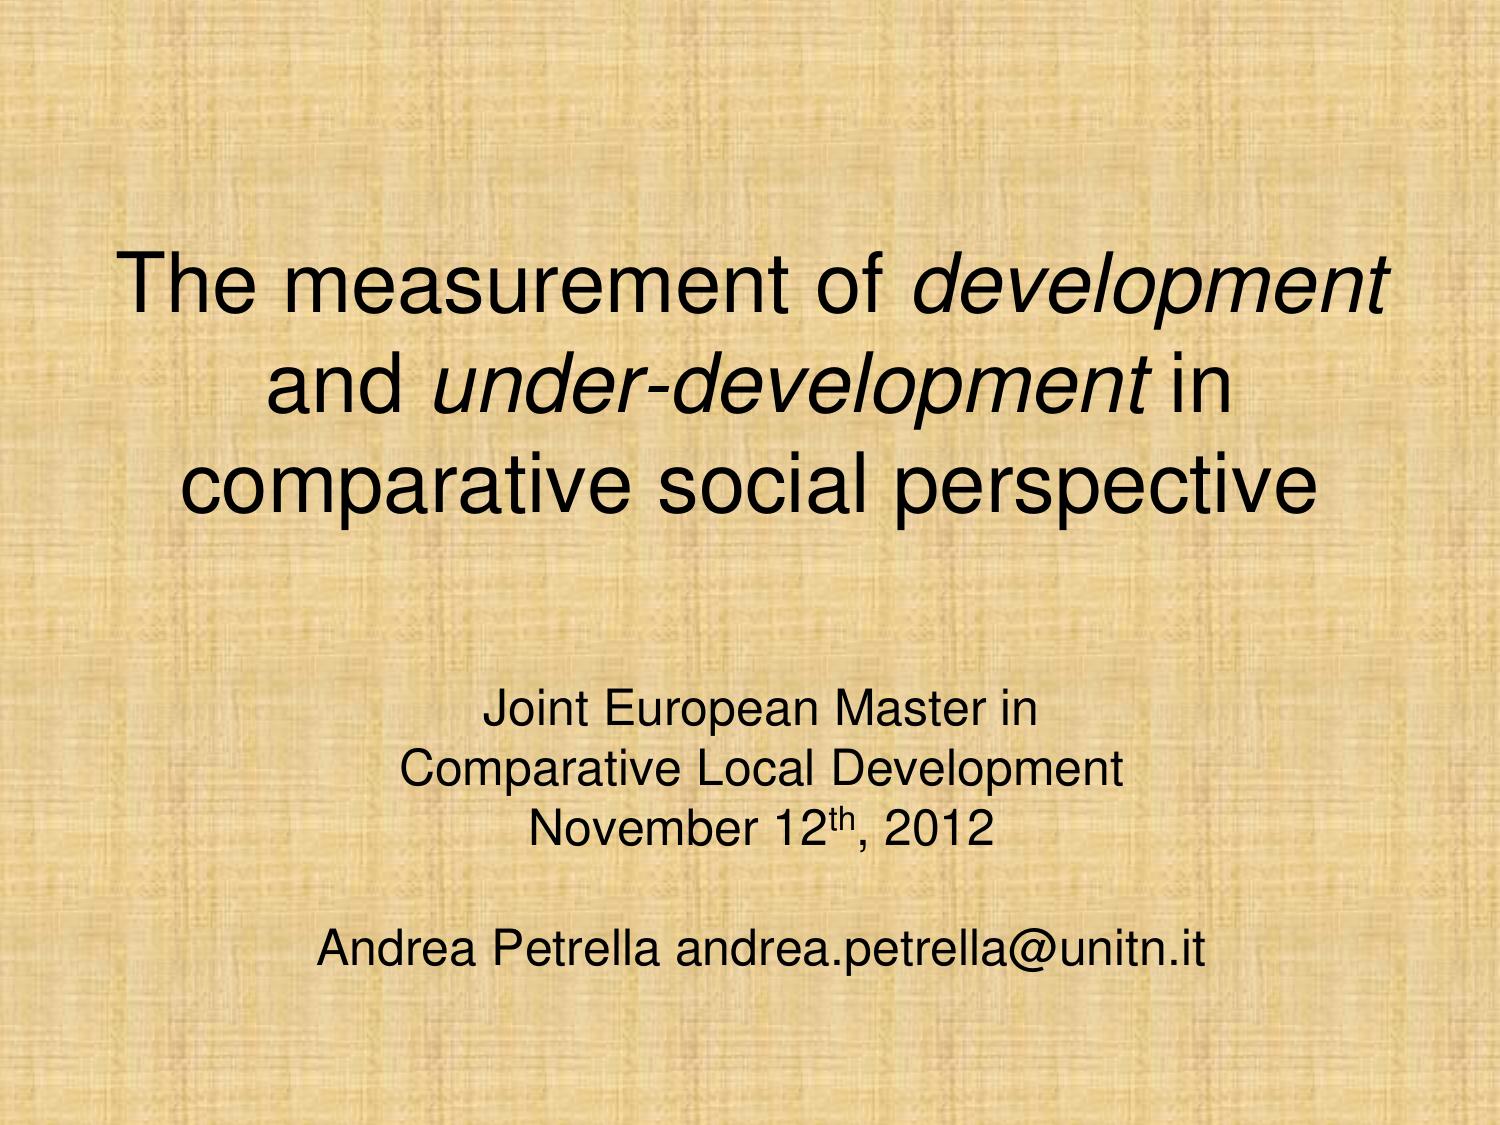 The measurement of development and under-development in comparative social perspective